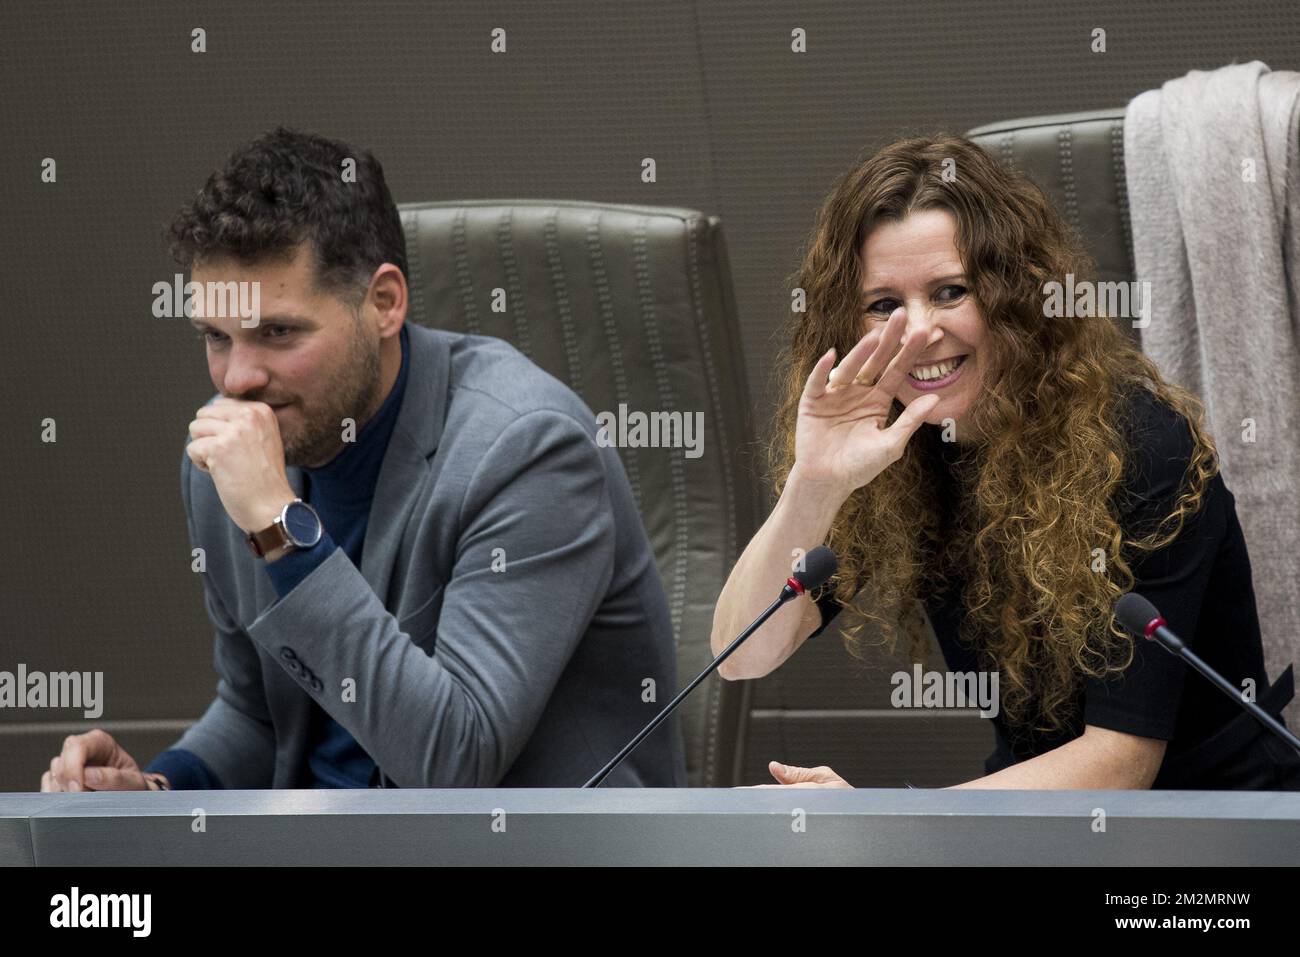 CD&V's Jamila Hamddan Lachkar (R) pictured during a plenary session of the Flemish Parliament in Brussels, Wednesday 05 December 2018. BELGA PHOTO JASPER JACOBS Stock Photo